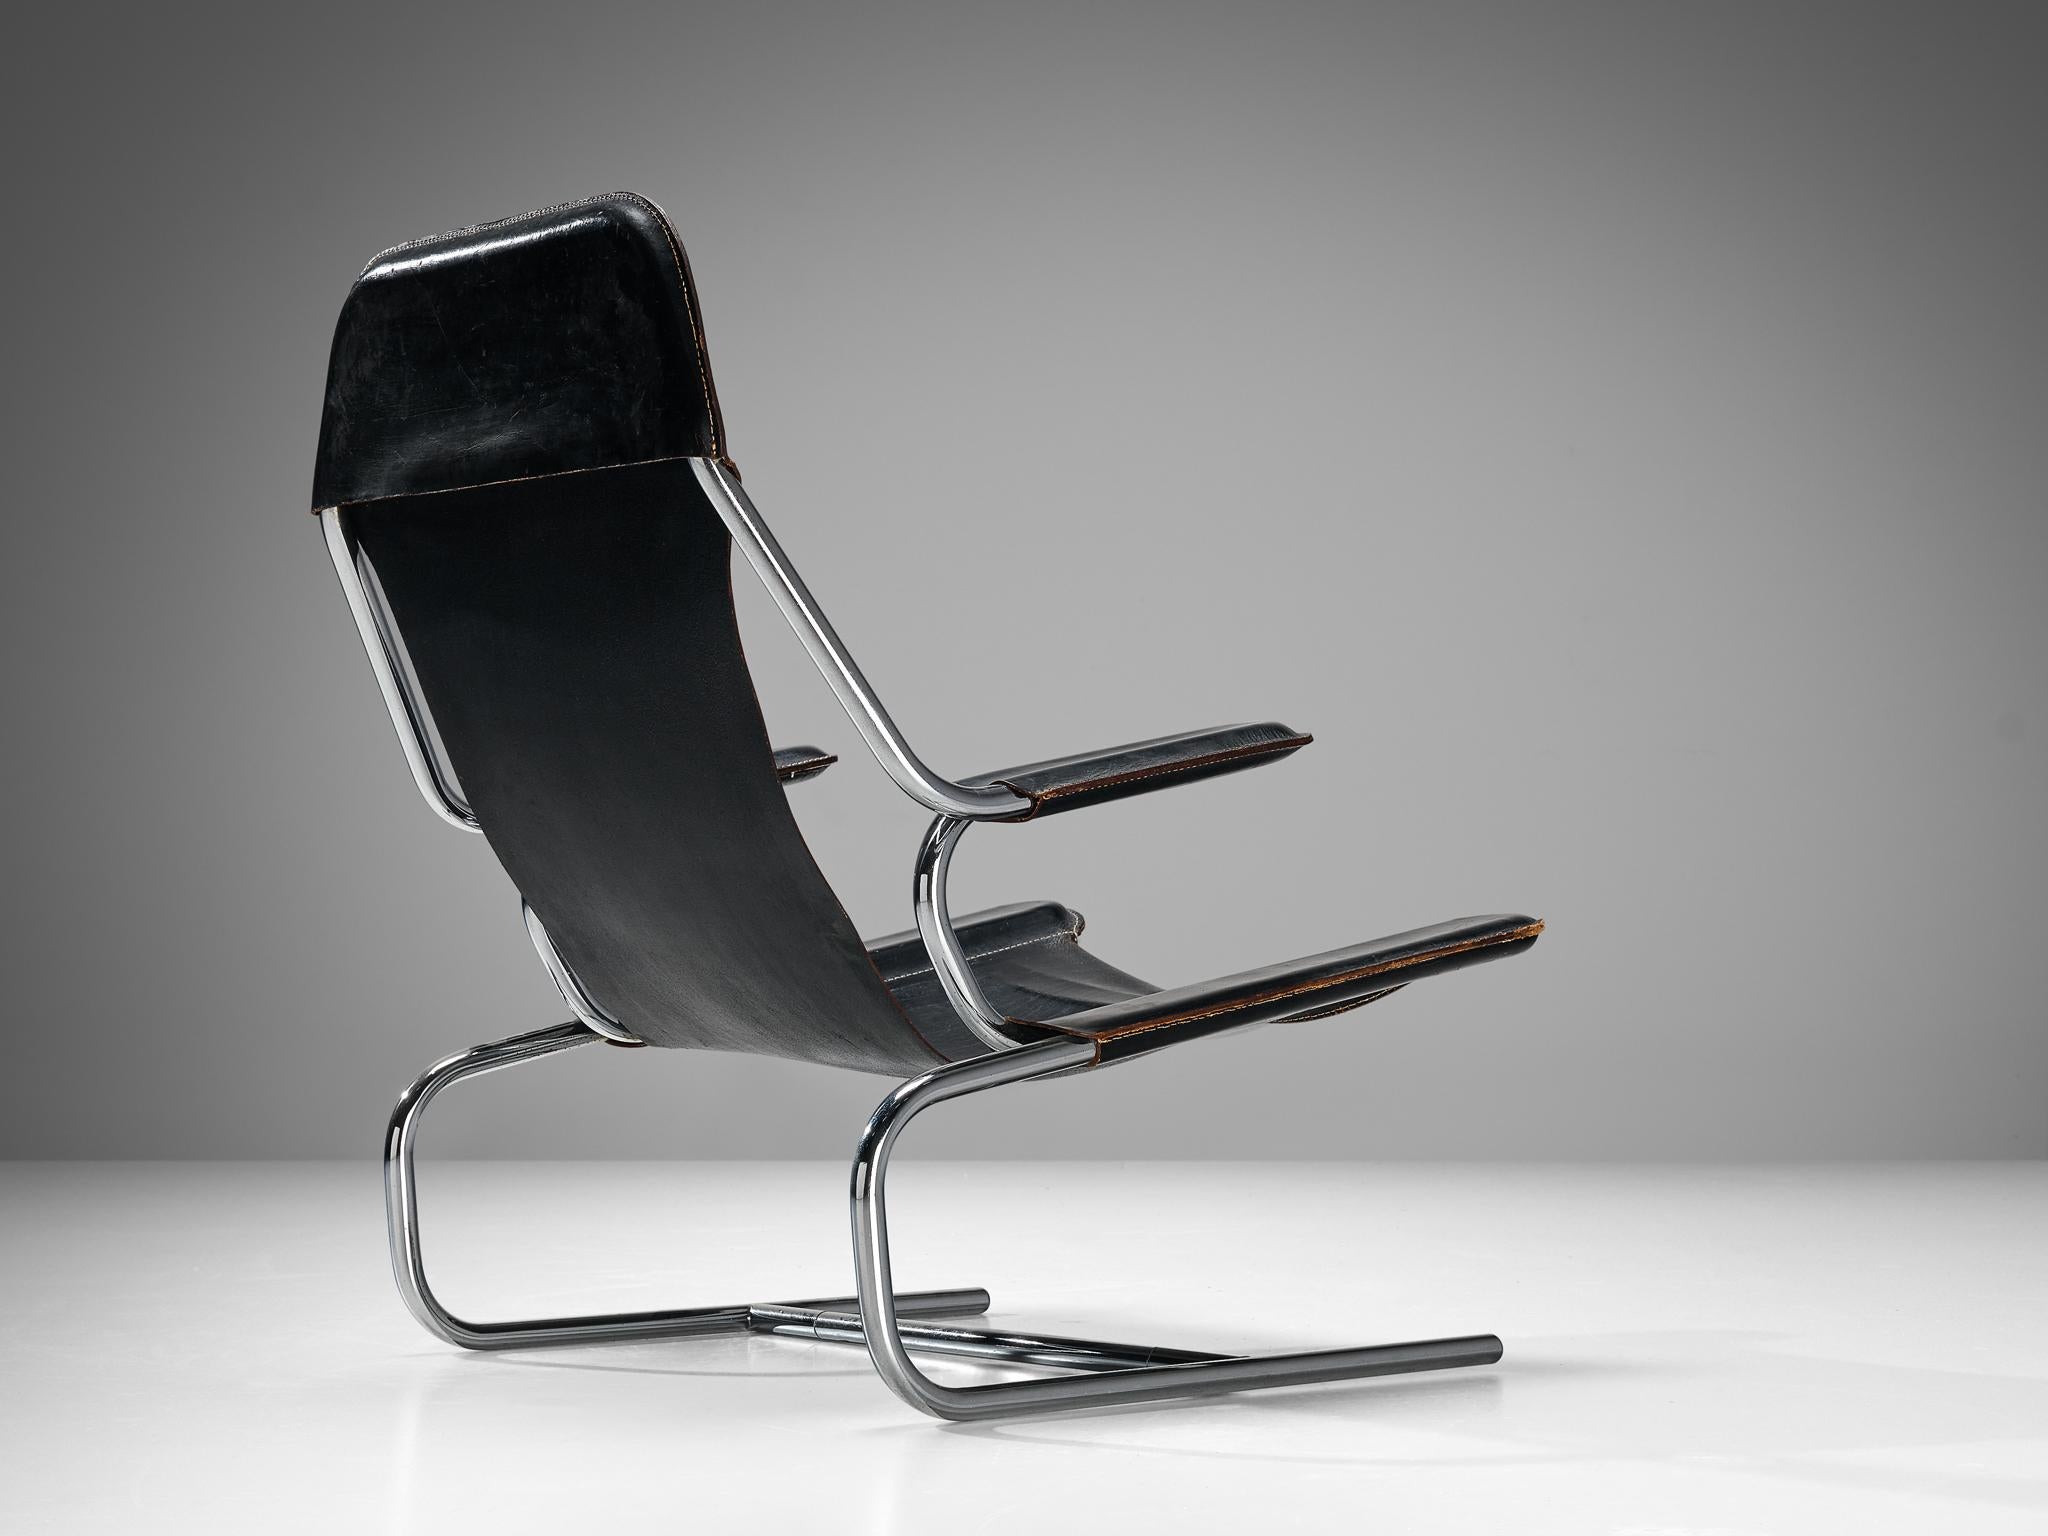 Lounge chair in steel and leather, Europe, 1950s.

Modern armchair made in Europe in the 1950s. This chair is made of bent tubular steel with black saddle leather upholstery. Beautiful curved lines combine into a modern and clean design. A true